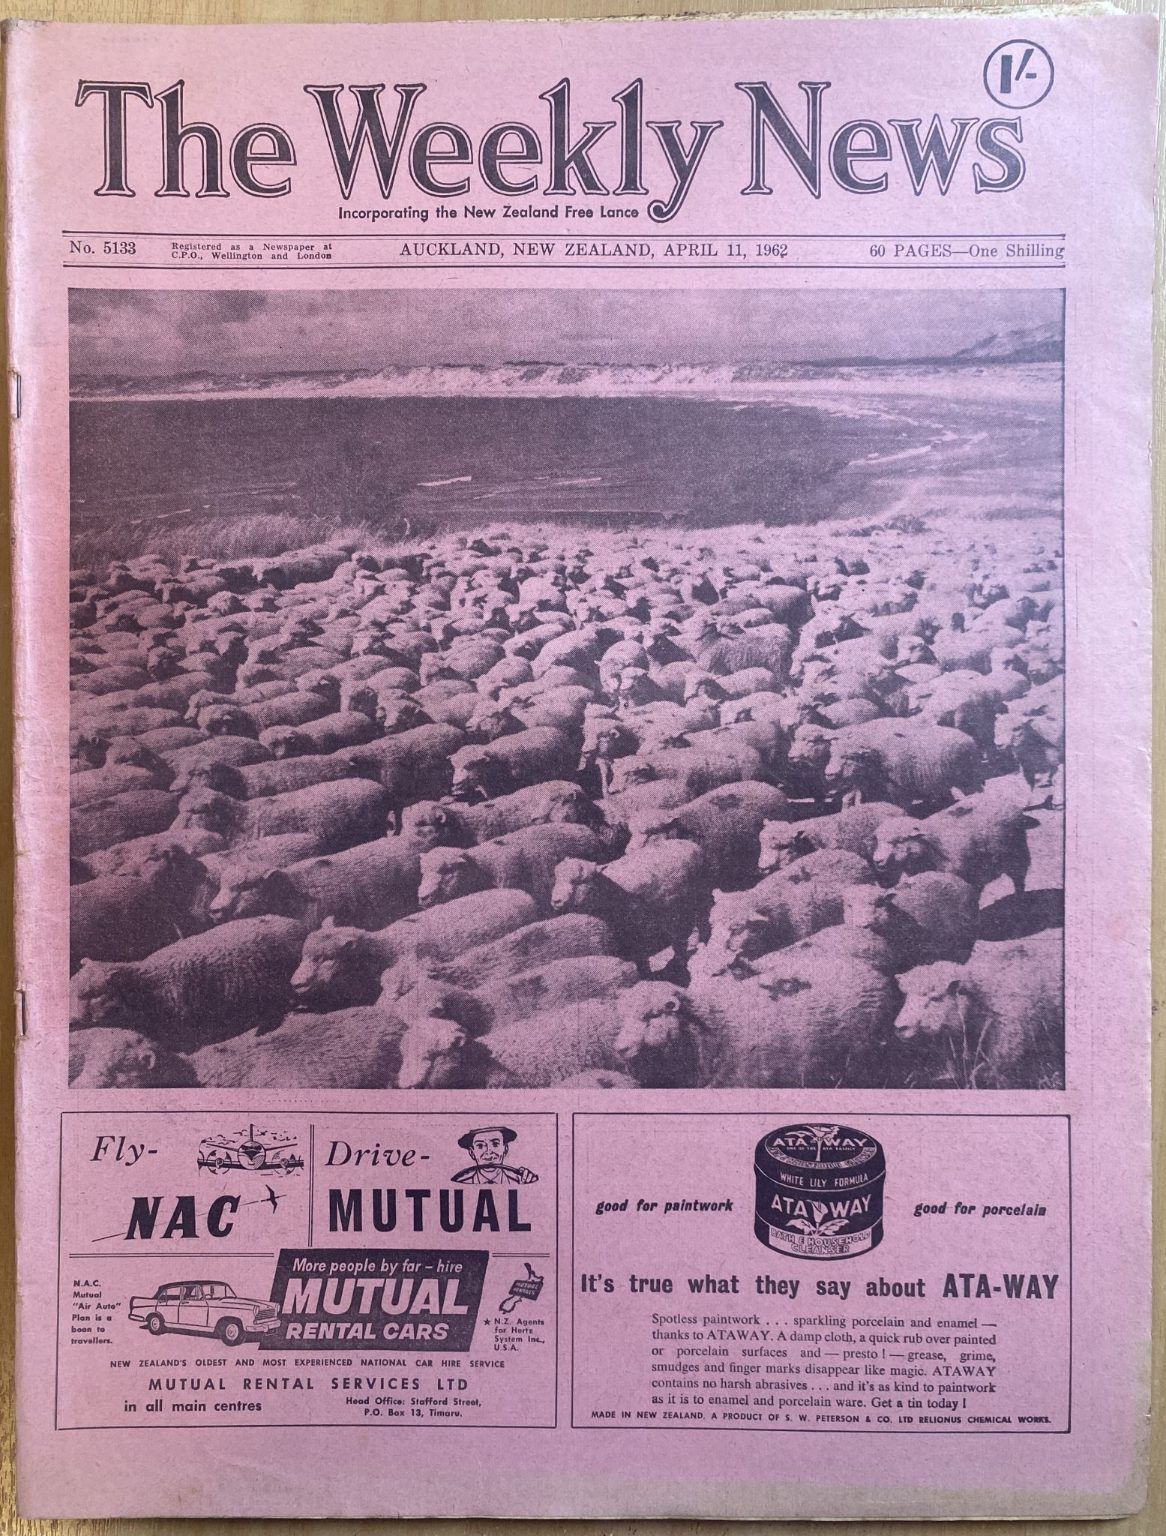 OLD NEWSPAPER: The Weekly News, No. 5133, 11 April 1962